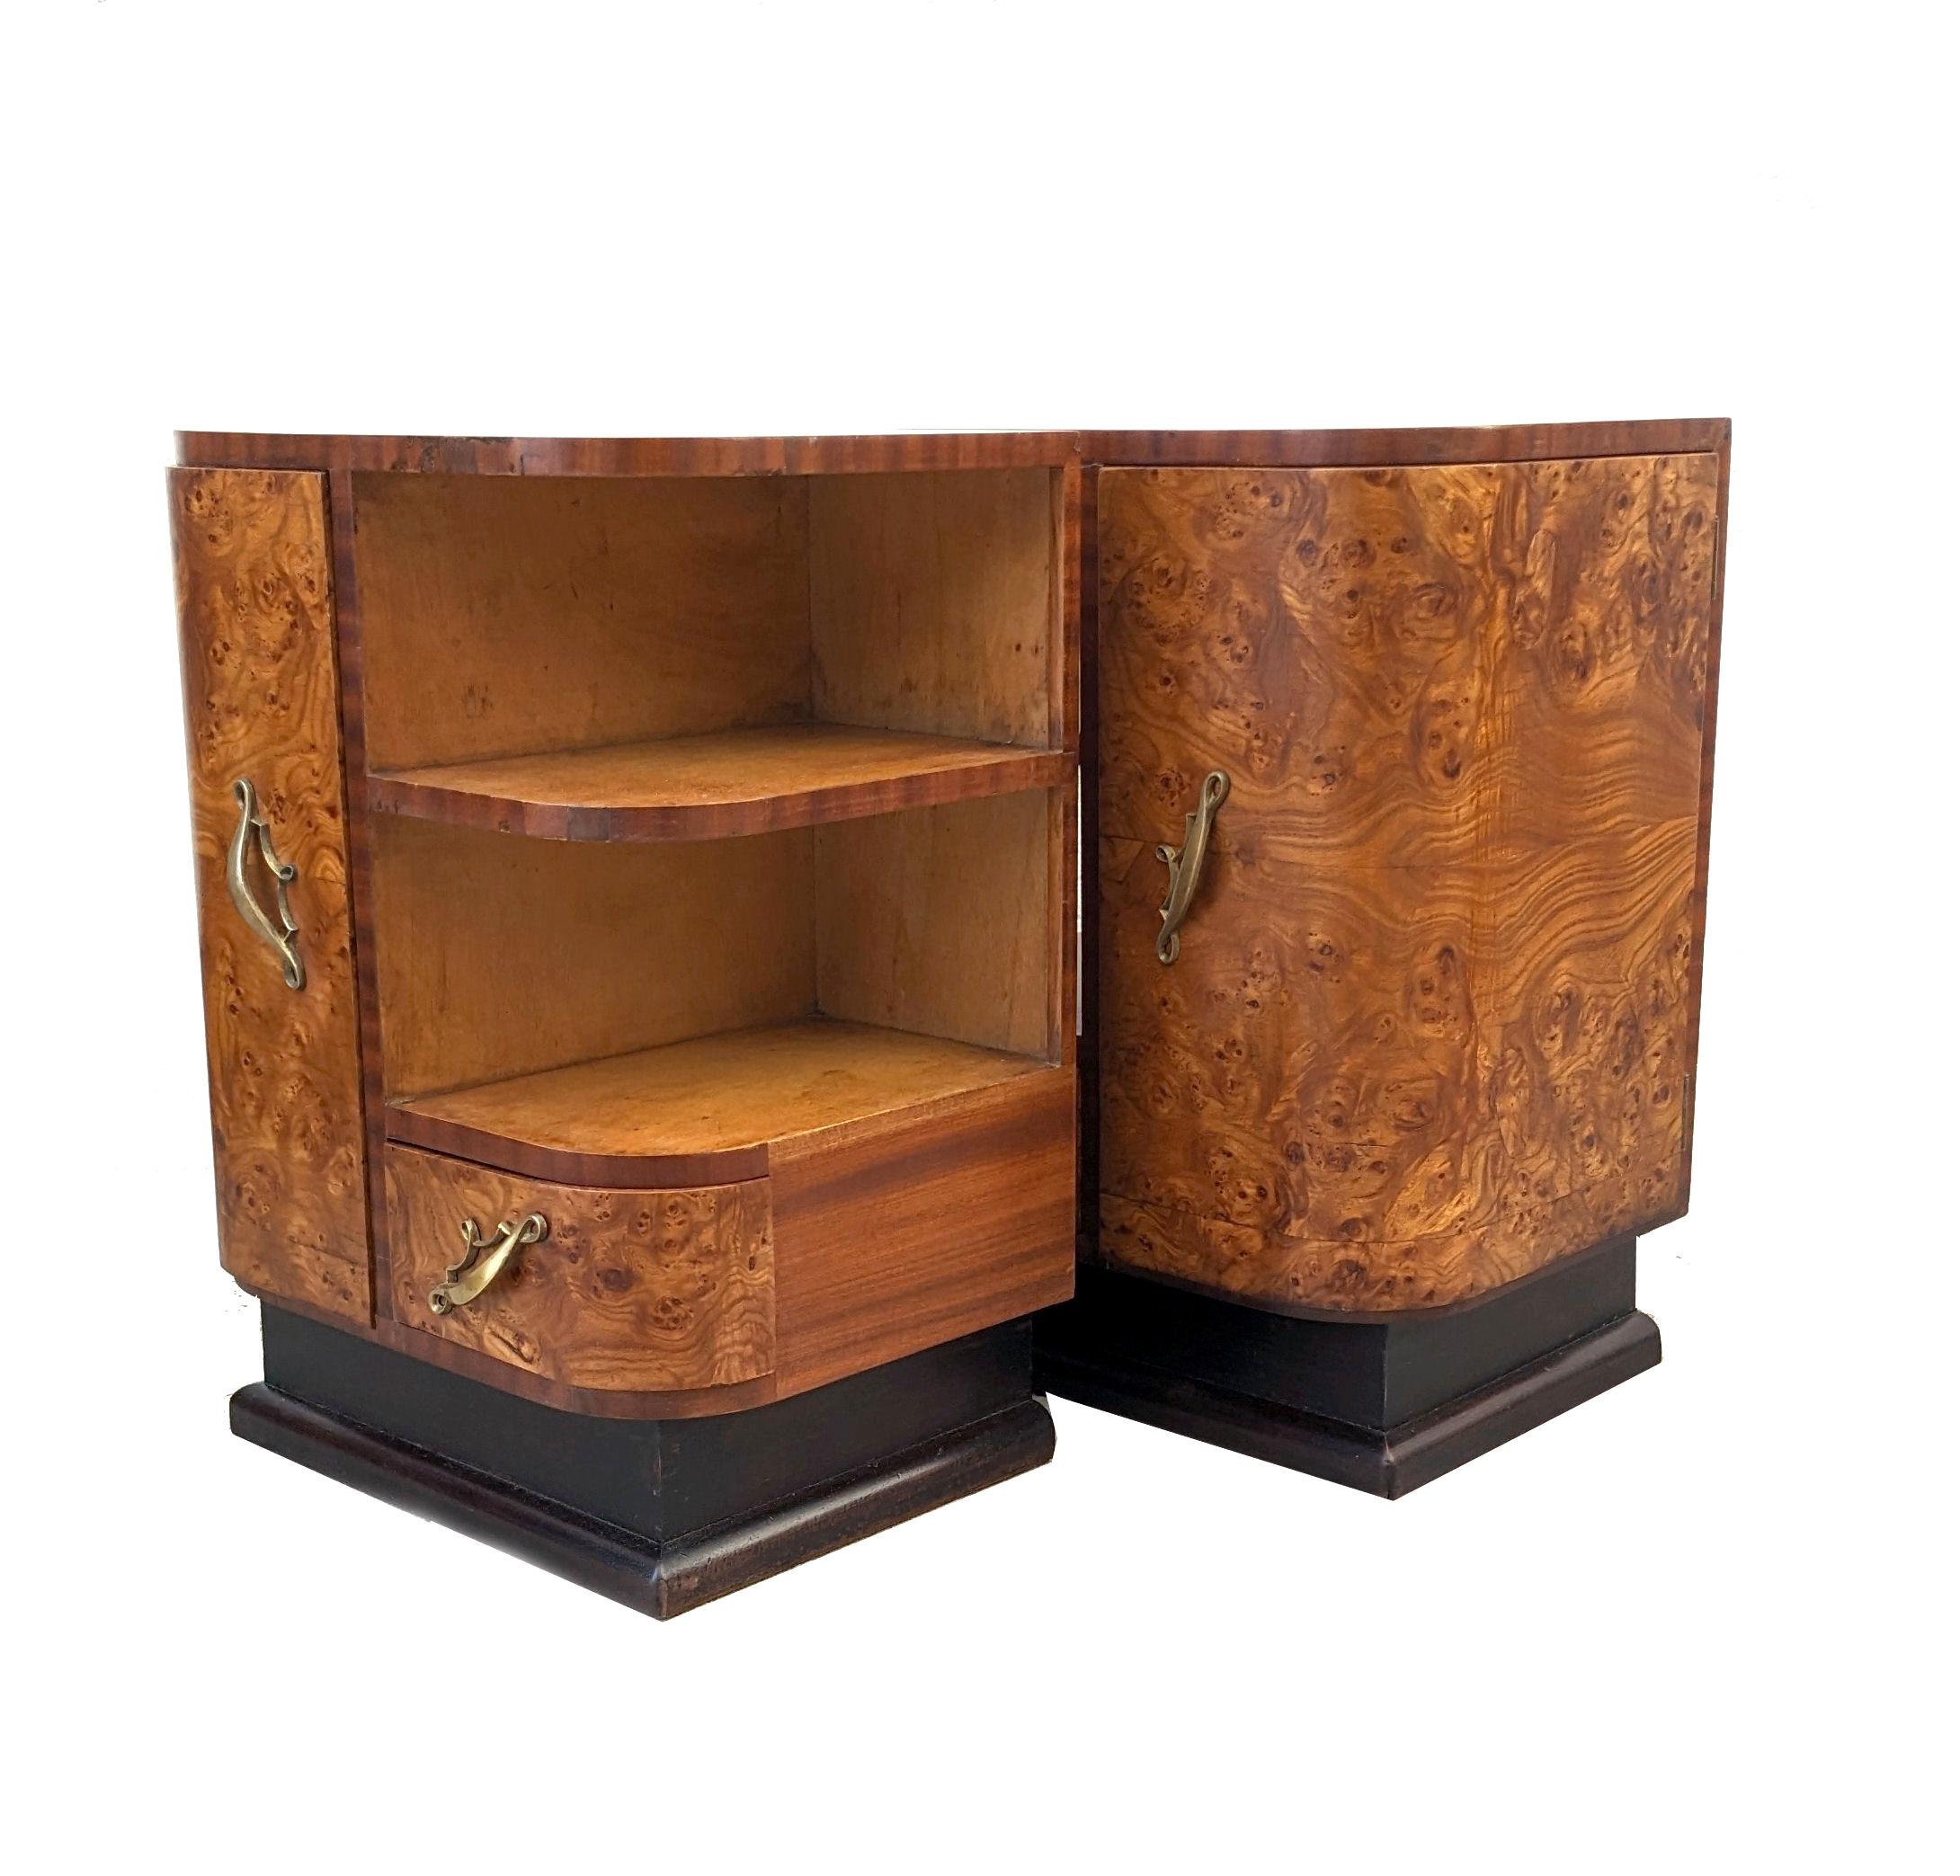 Spectacular Art Deco Pair Matching of Italian Bedside Table Nightstands, c1930 For Sale 3